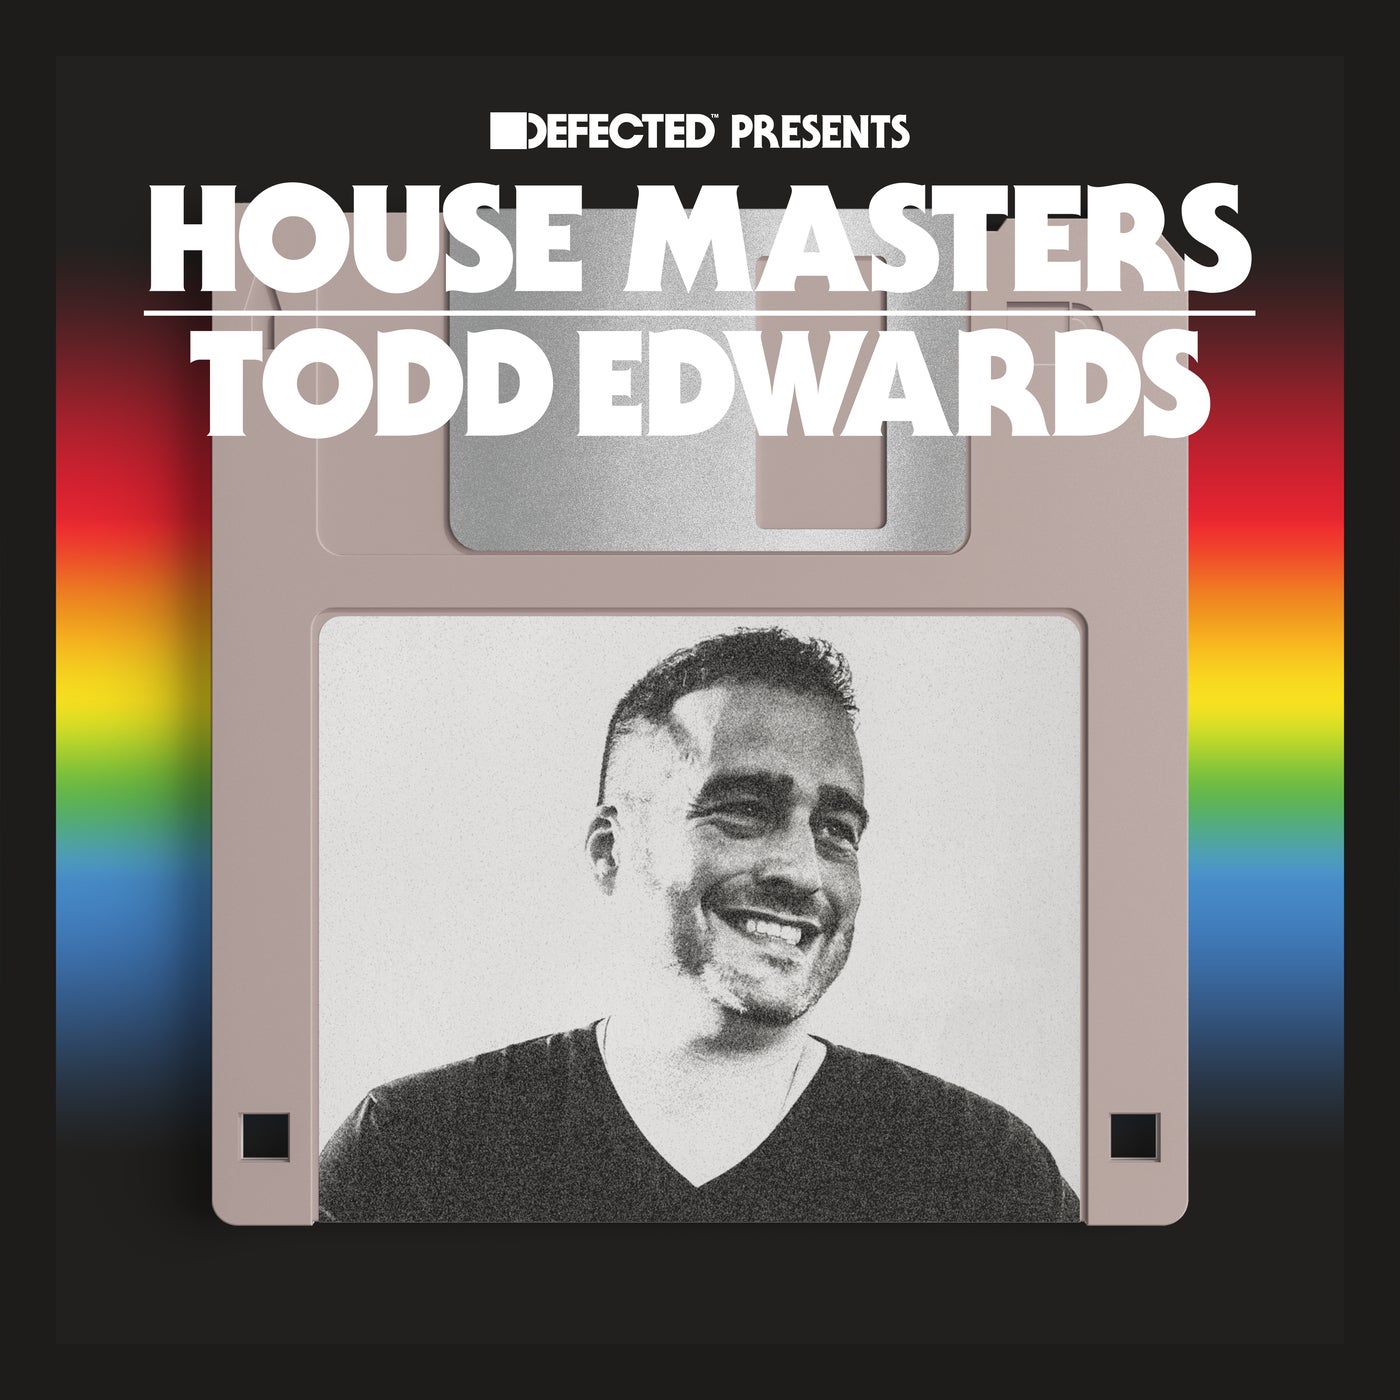 VA – Defected presents House Masters – Todd Edwards